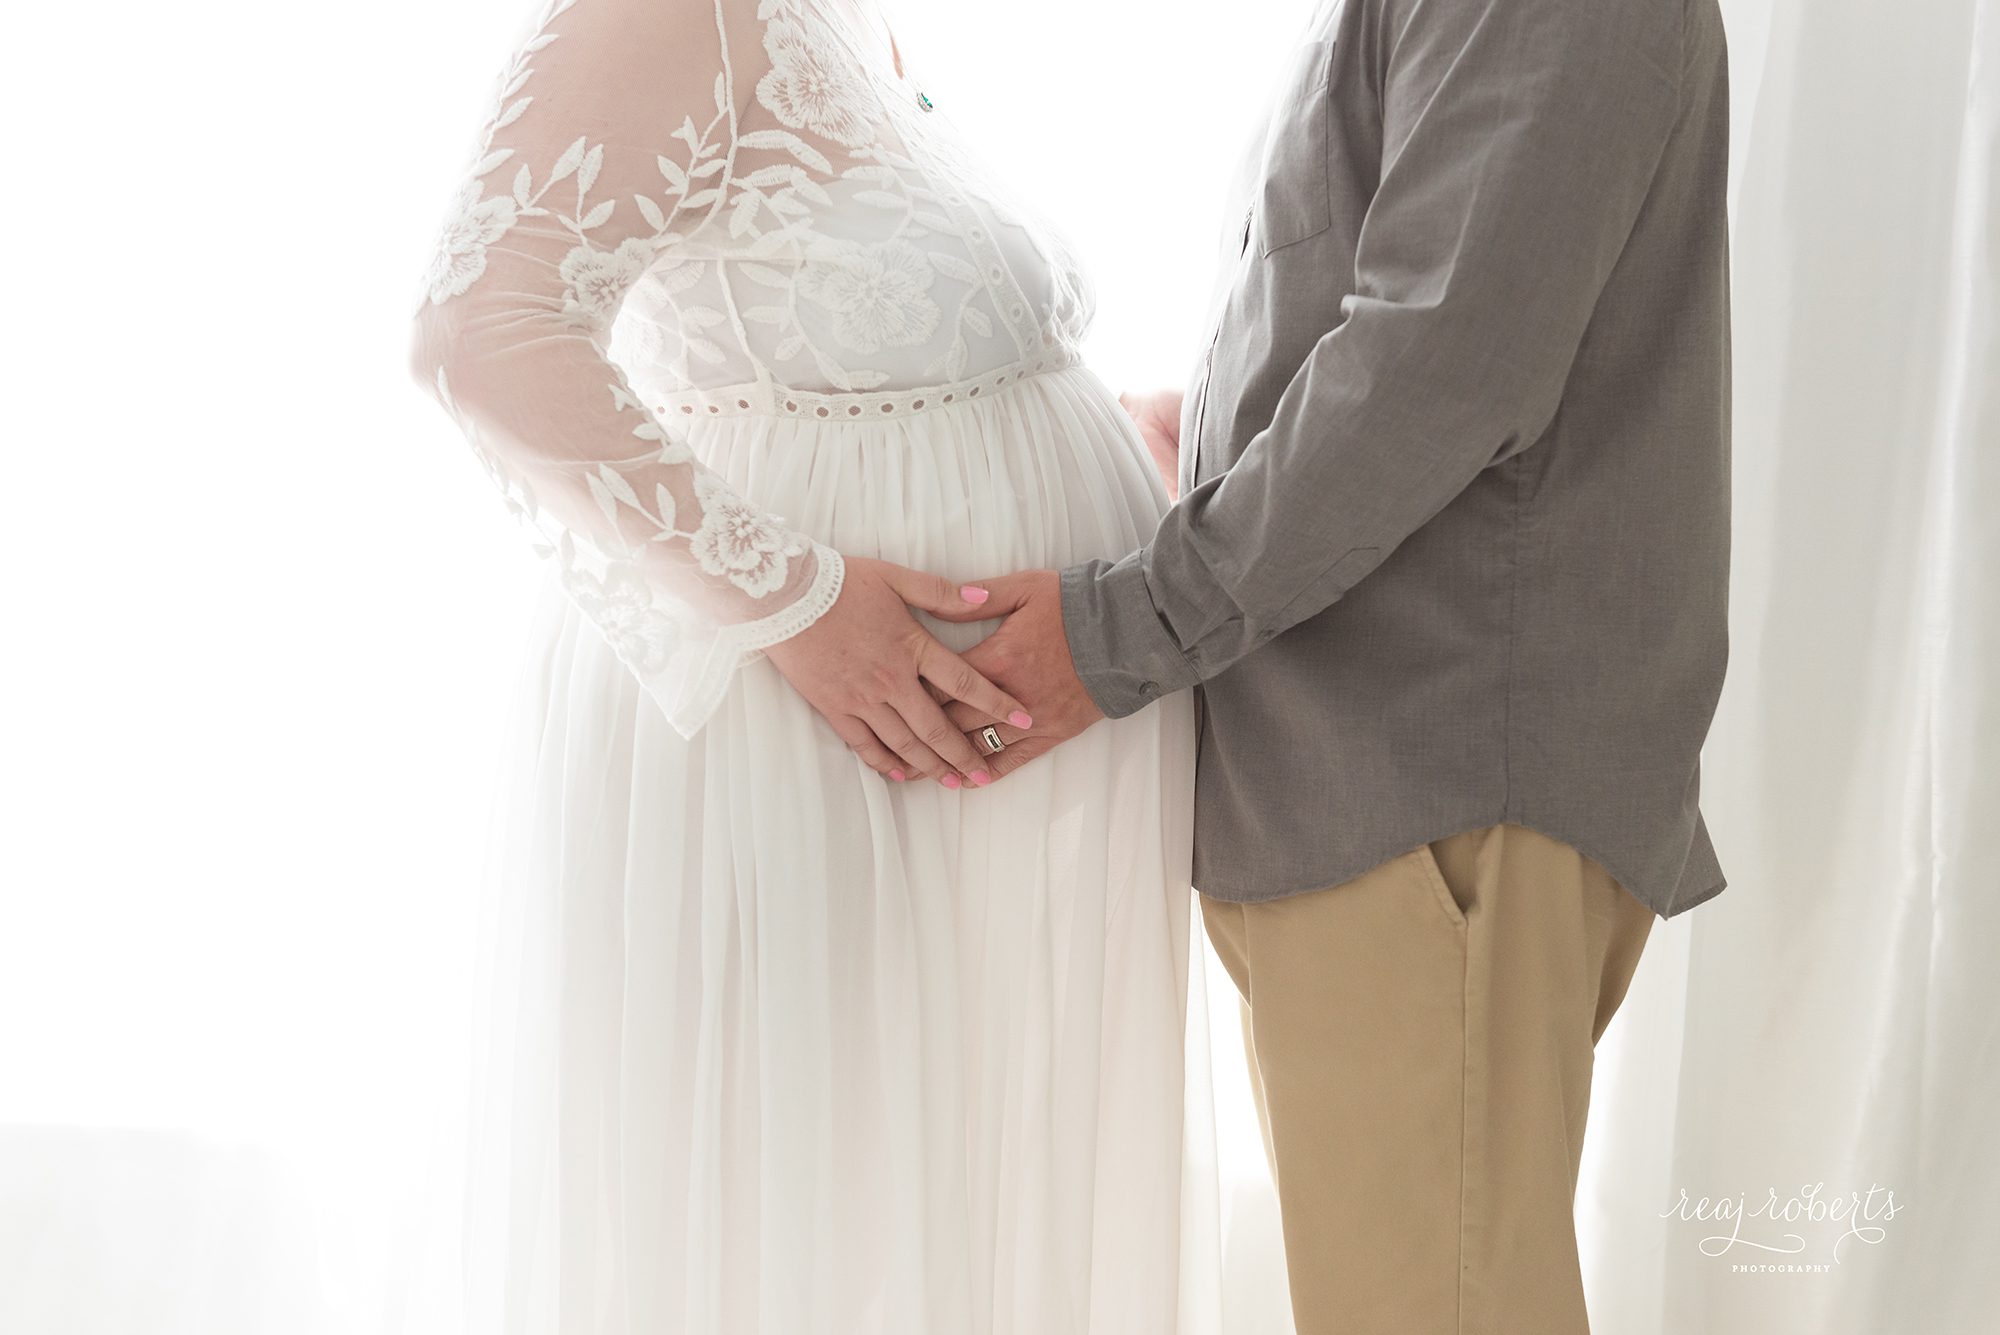 maternity session wearing white lace gown | Reaj Roberts Photography